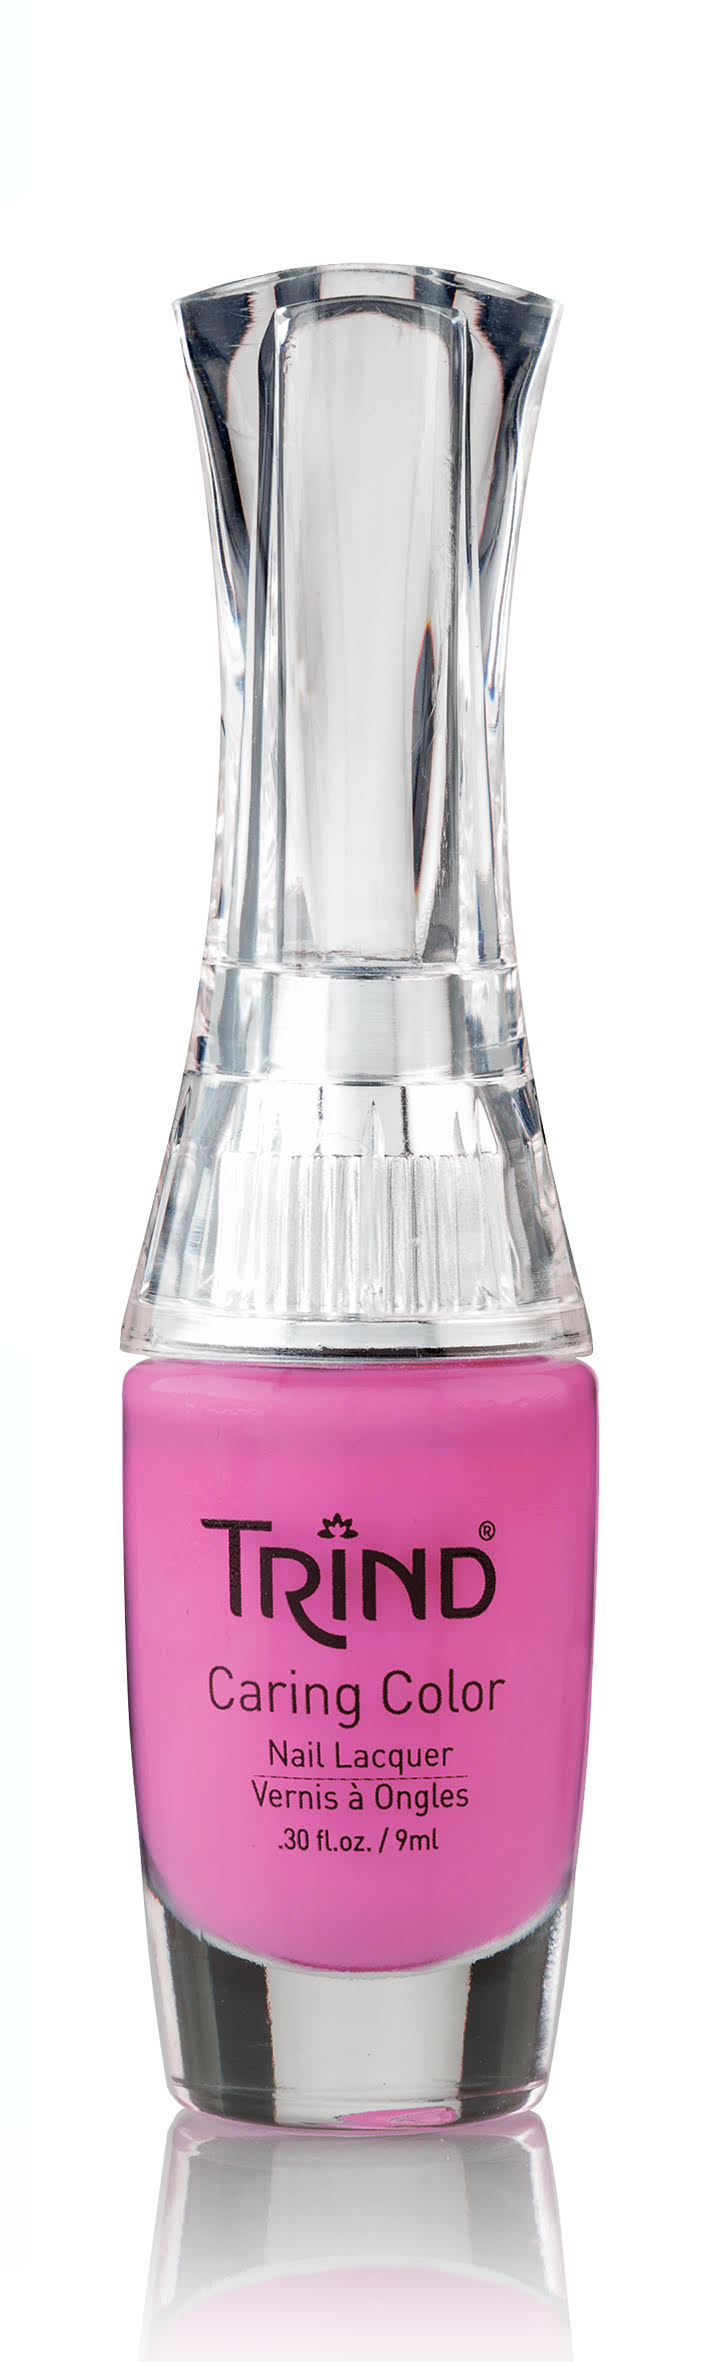 Trind Caring Color Nail Lacquer CC212